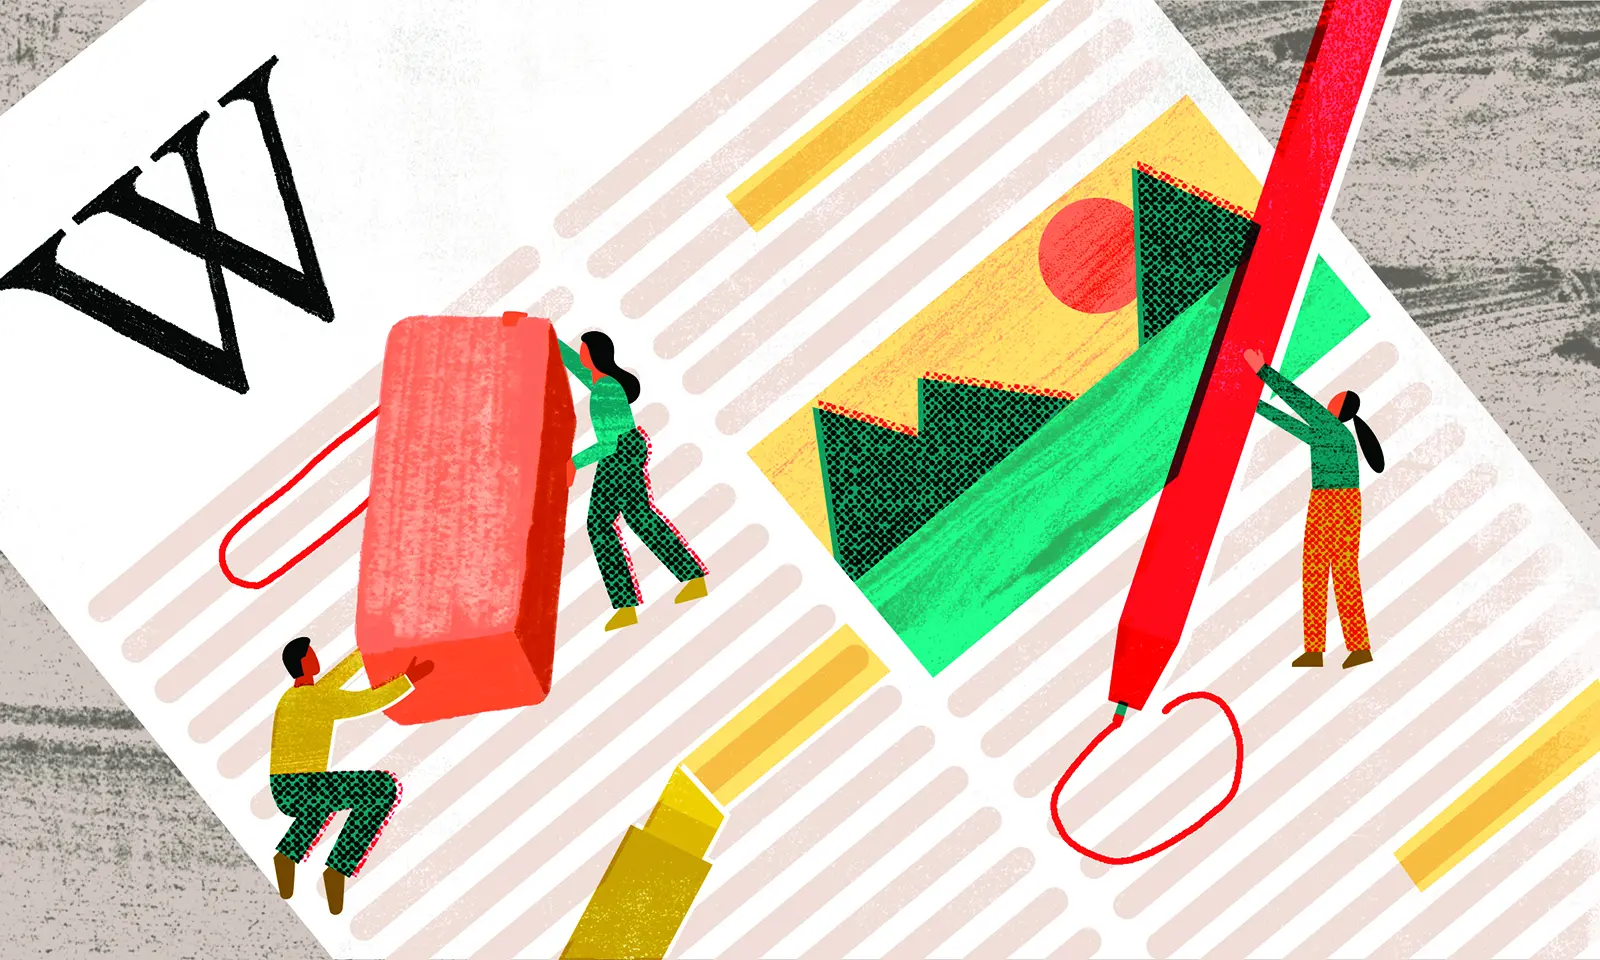 This illustration shows simple little figures standing on a piece of paper with figural lines of text and pictures. The people are editing the text: Two maneuver a giant eraser and a third wields a red pen, common tools of editors from the days of yore.